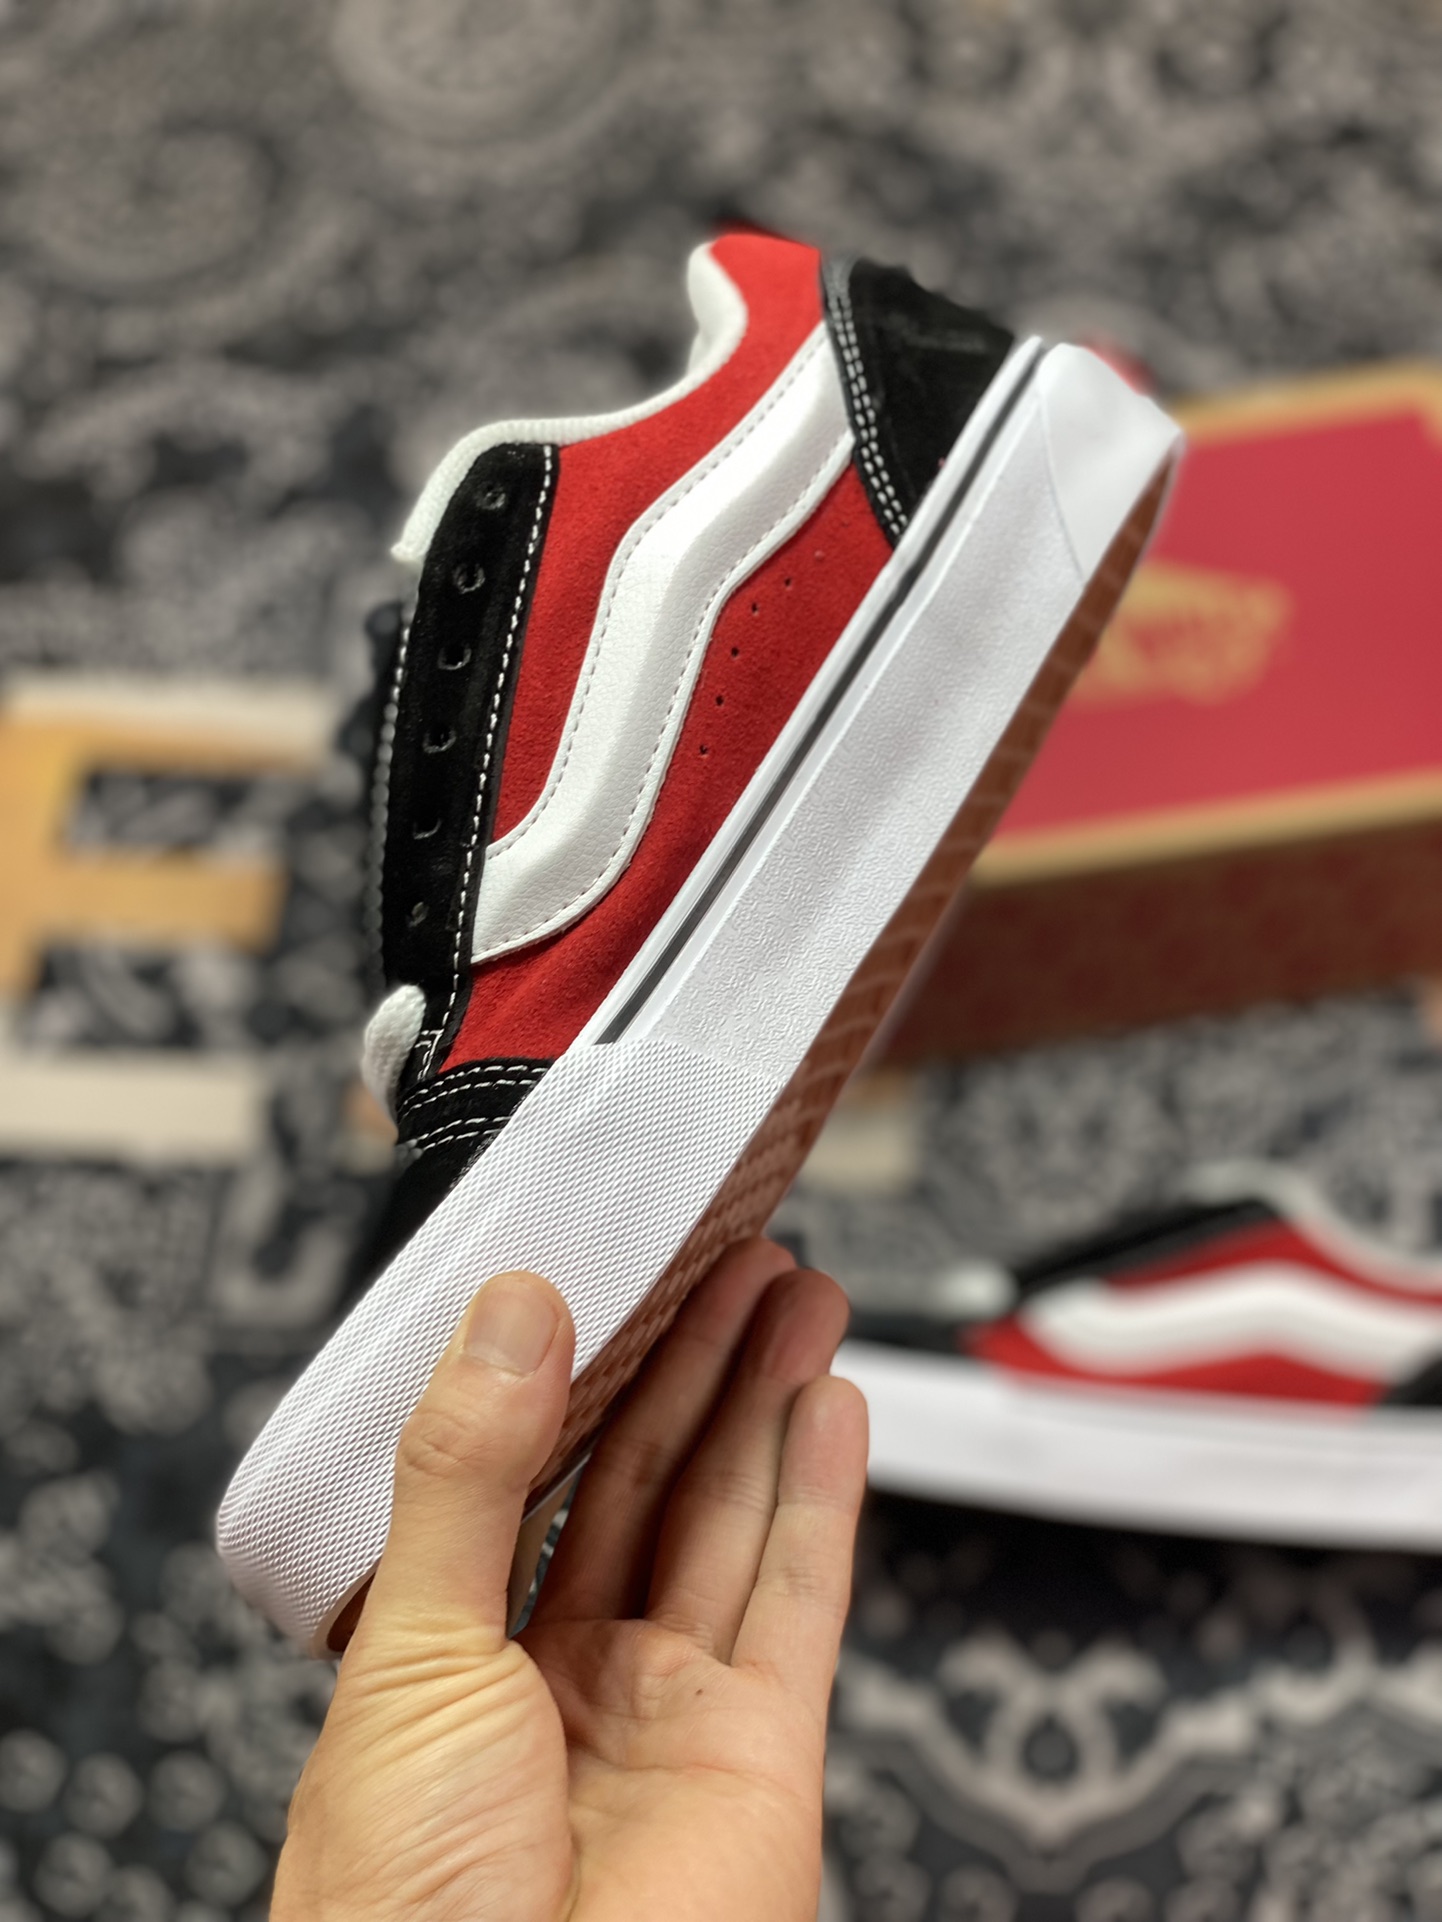 Vans Knu-Skool VR3 LX bread shoes black and red stitching low-top retro casual vulcanized sneakers